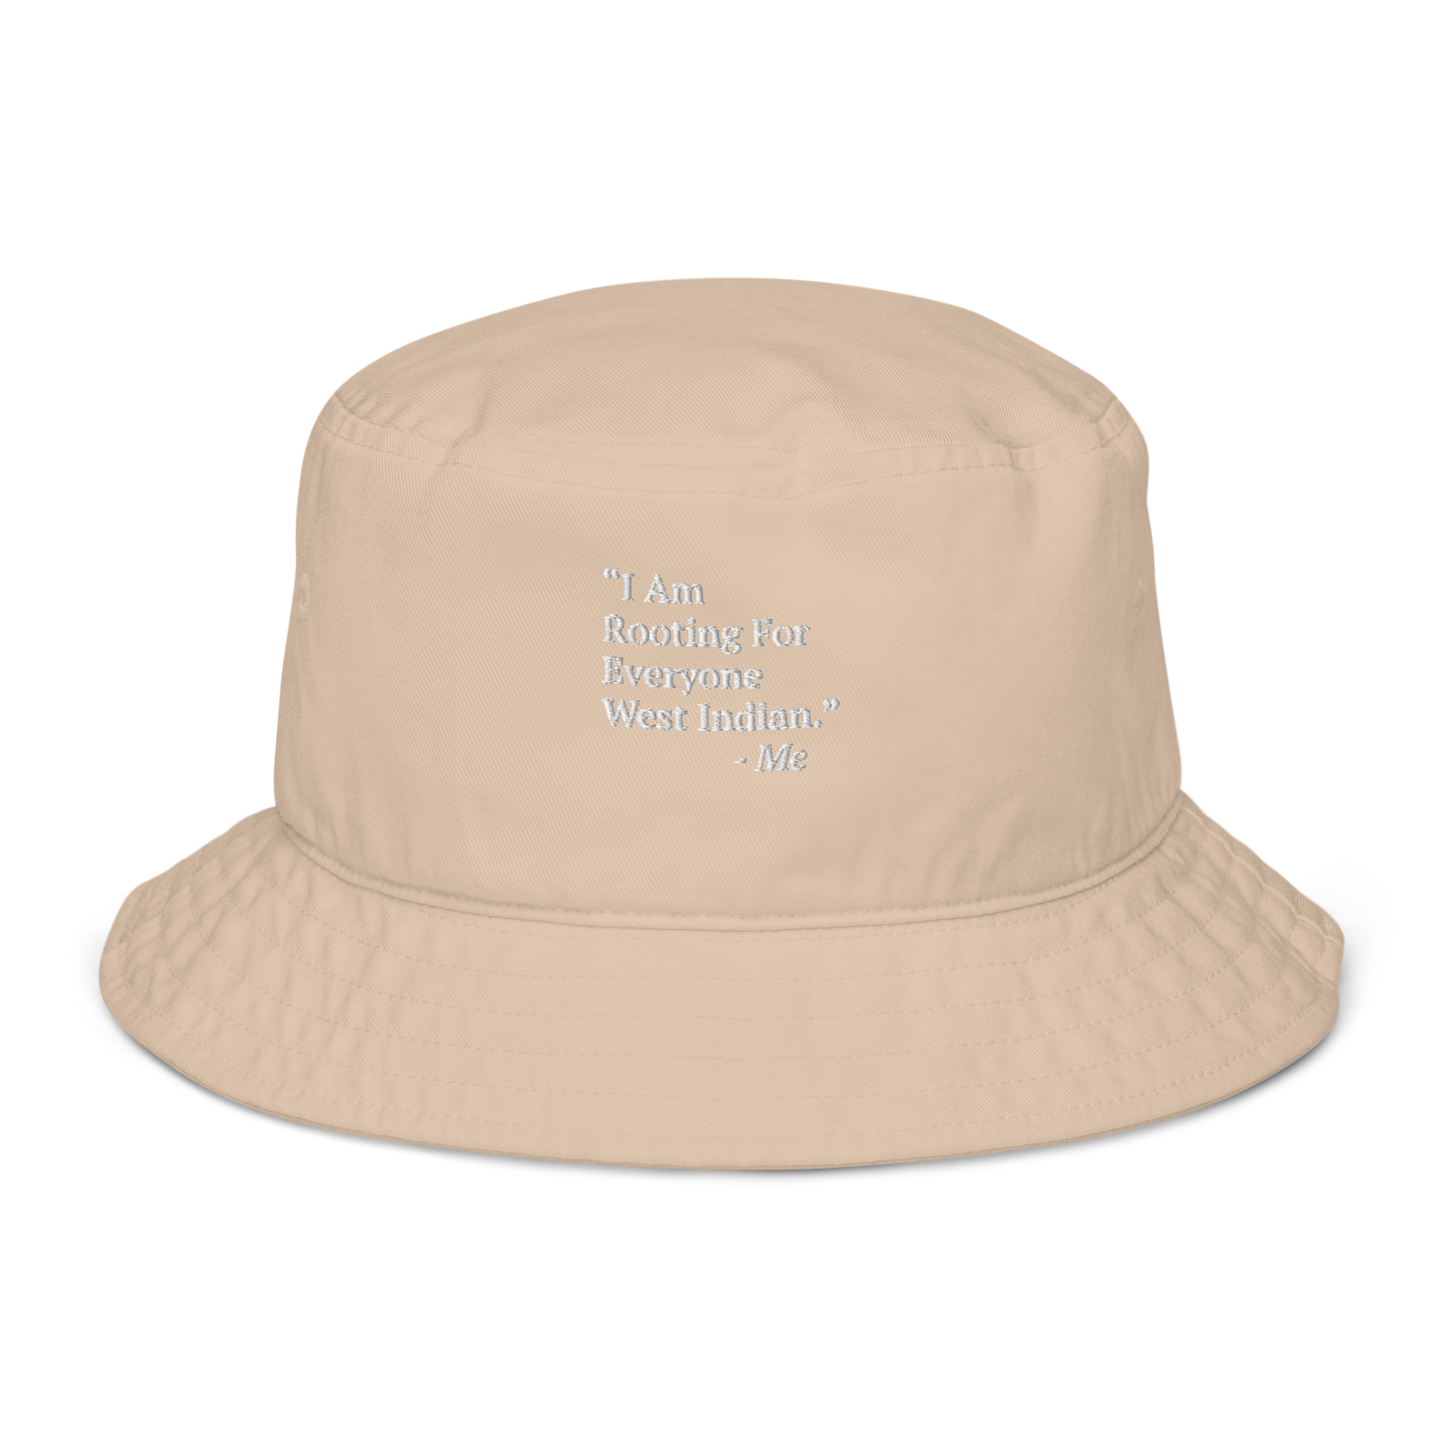 I Am Rooting: West Indian Organic bucket hat